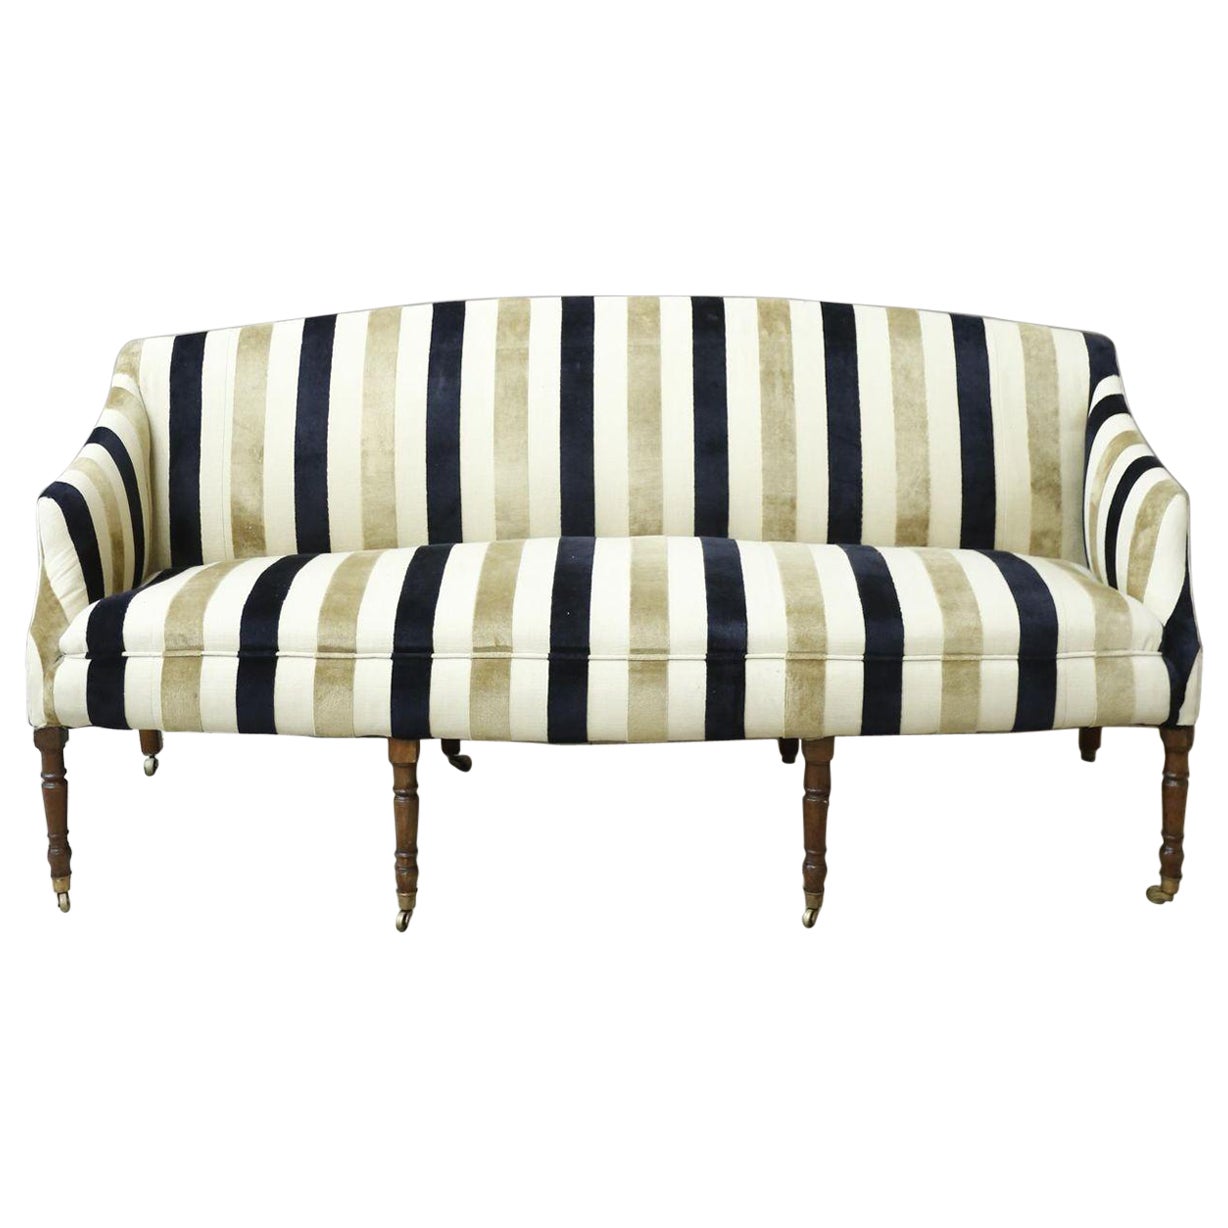 Georgian country house sofa with shaped arms For Sale